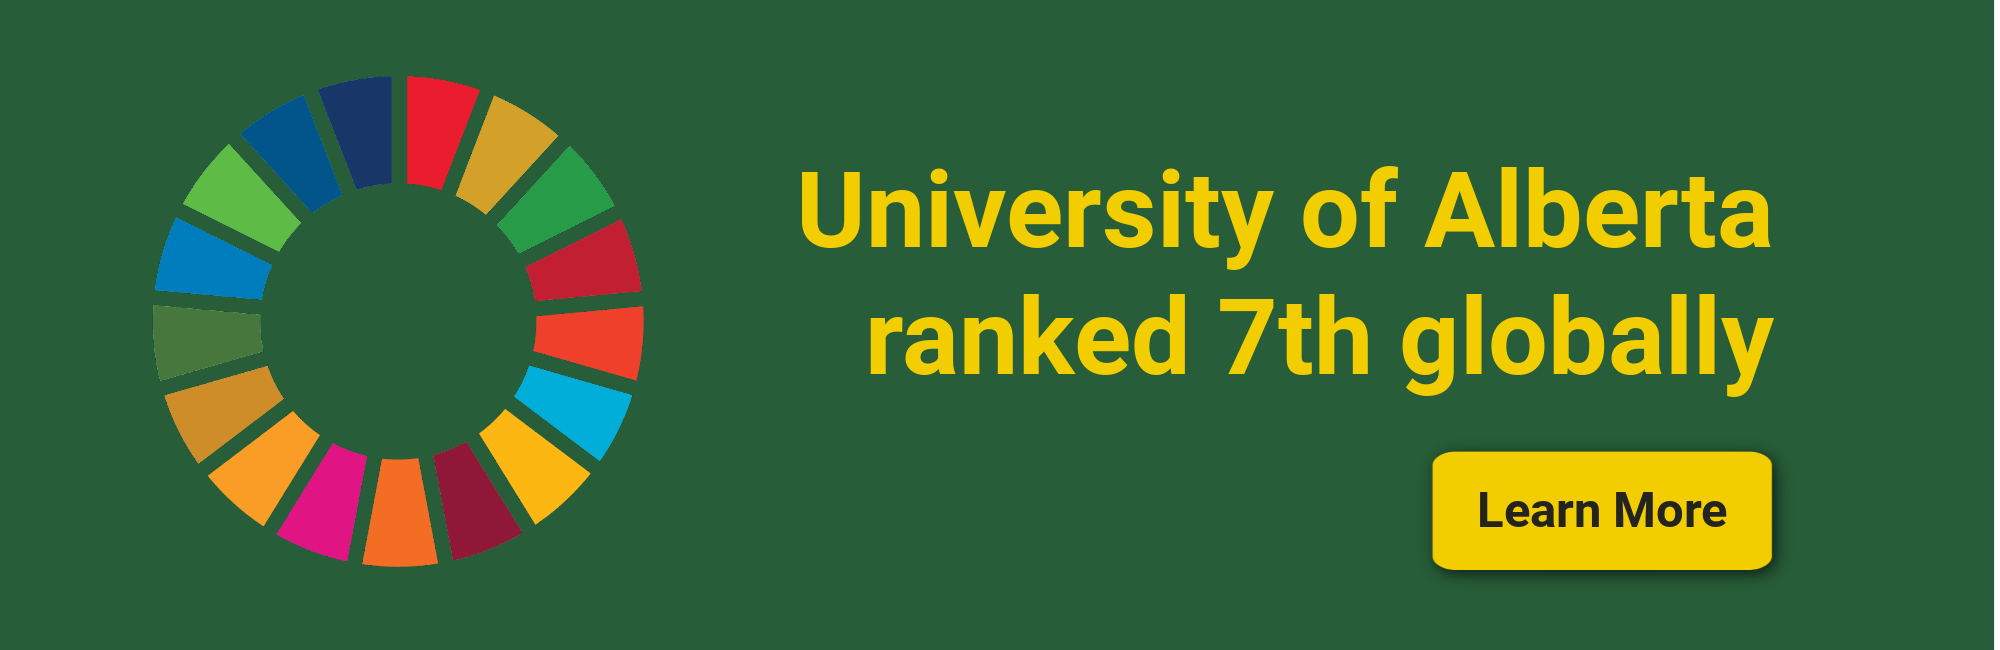 U of A ranked 7th globally - click to read more